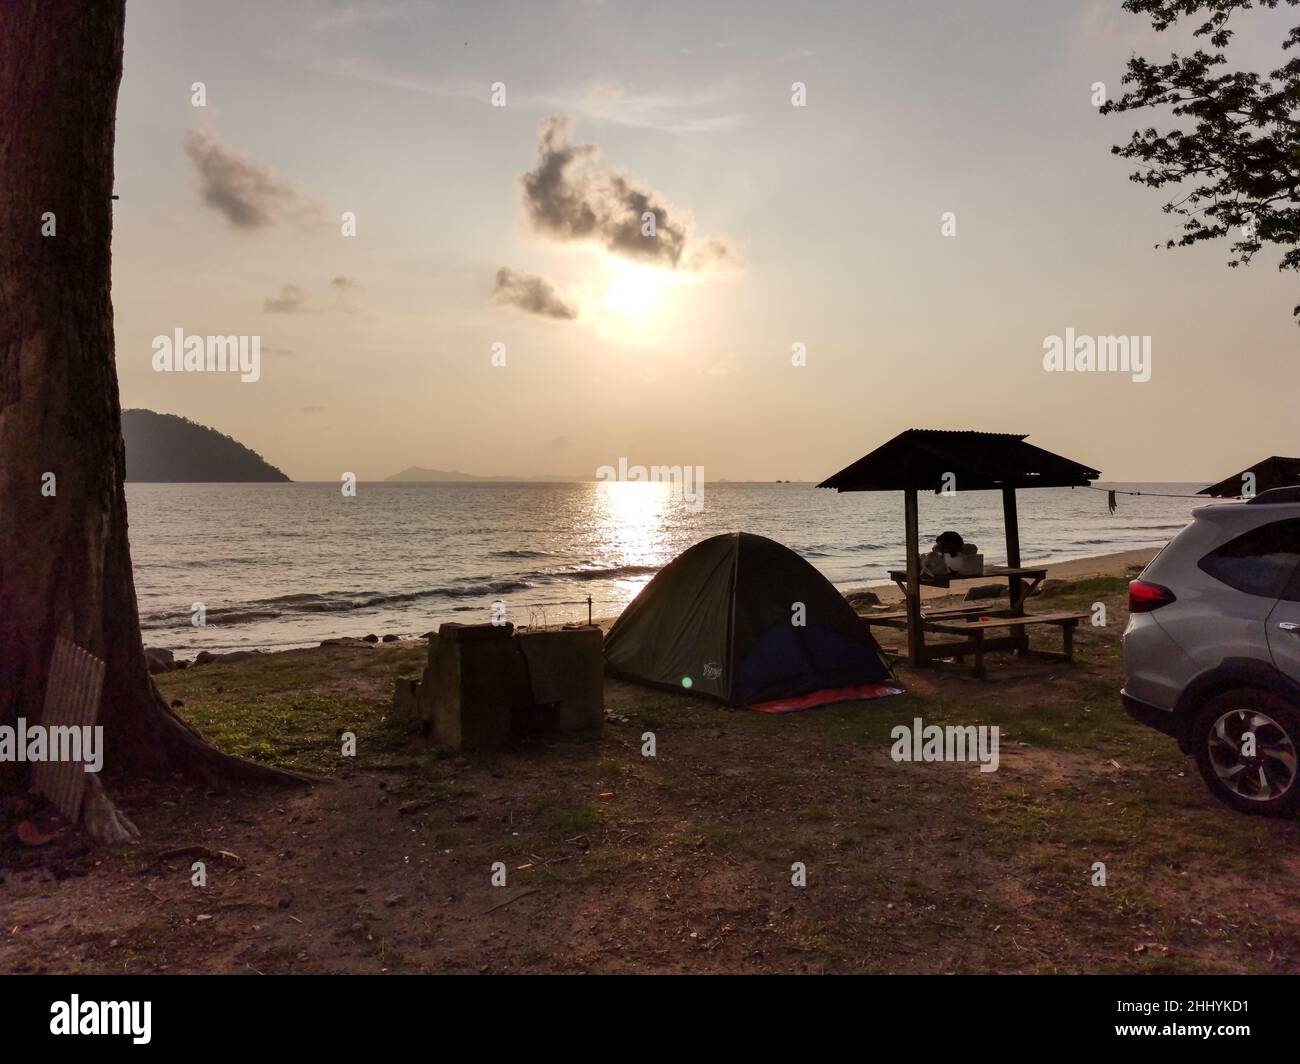 Camping with tent on the beach in the morning with golden sky and sunrise. Tent and picnic table during sunrise with sunlight on a sandy beach Stock Photo